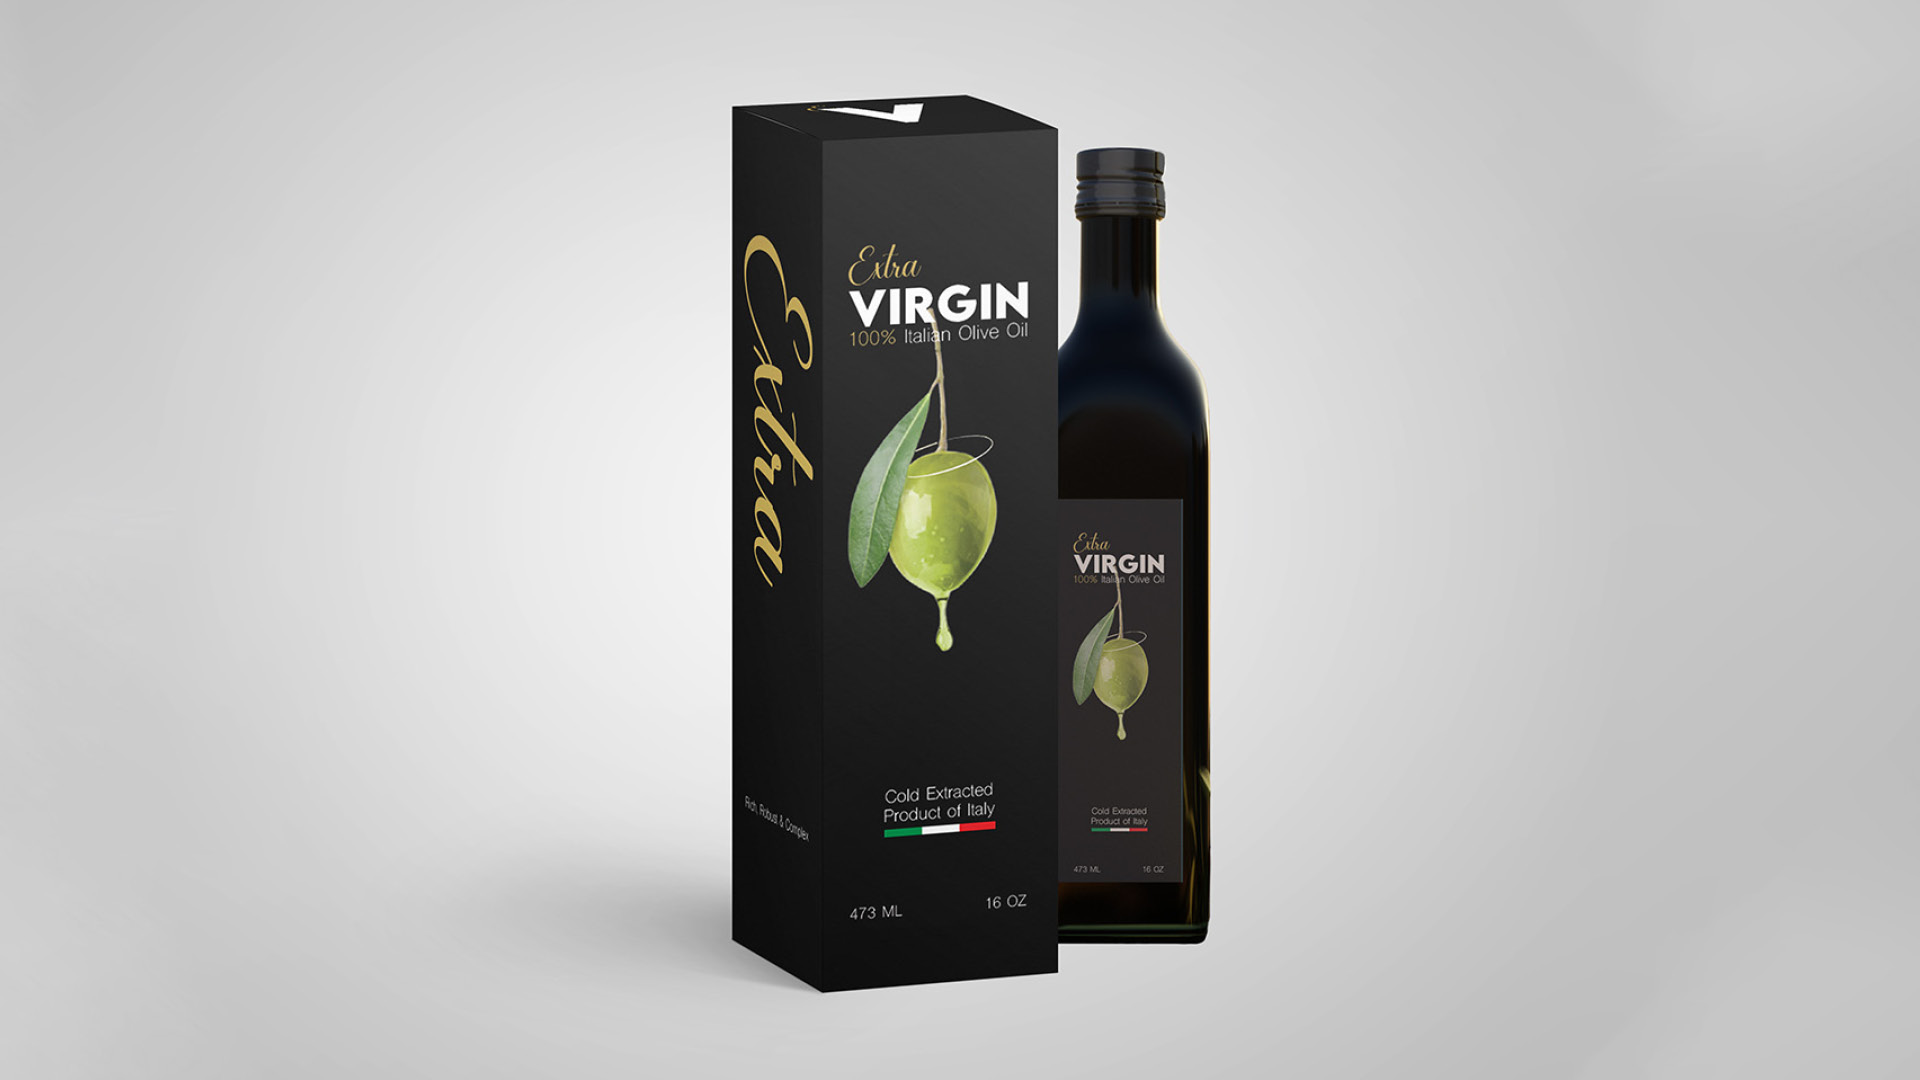 "Extra Virgin,"   / "Extra Virgin," Branding and Box Design, 14x3.5x3.5 inches printed box, 2023. This box and branding was created to be an elegant gift. 
